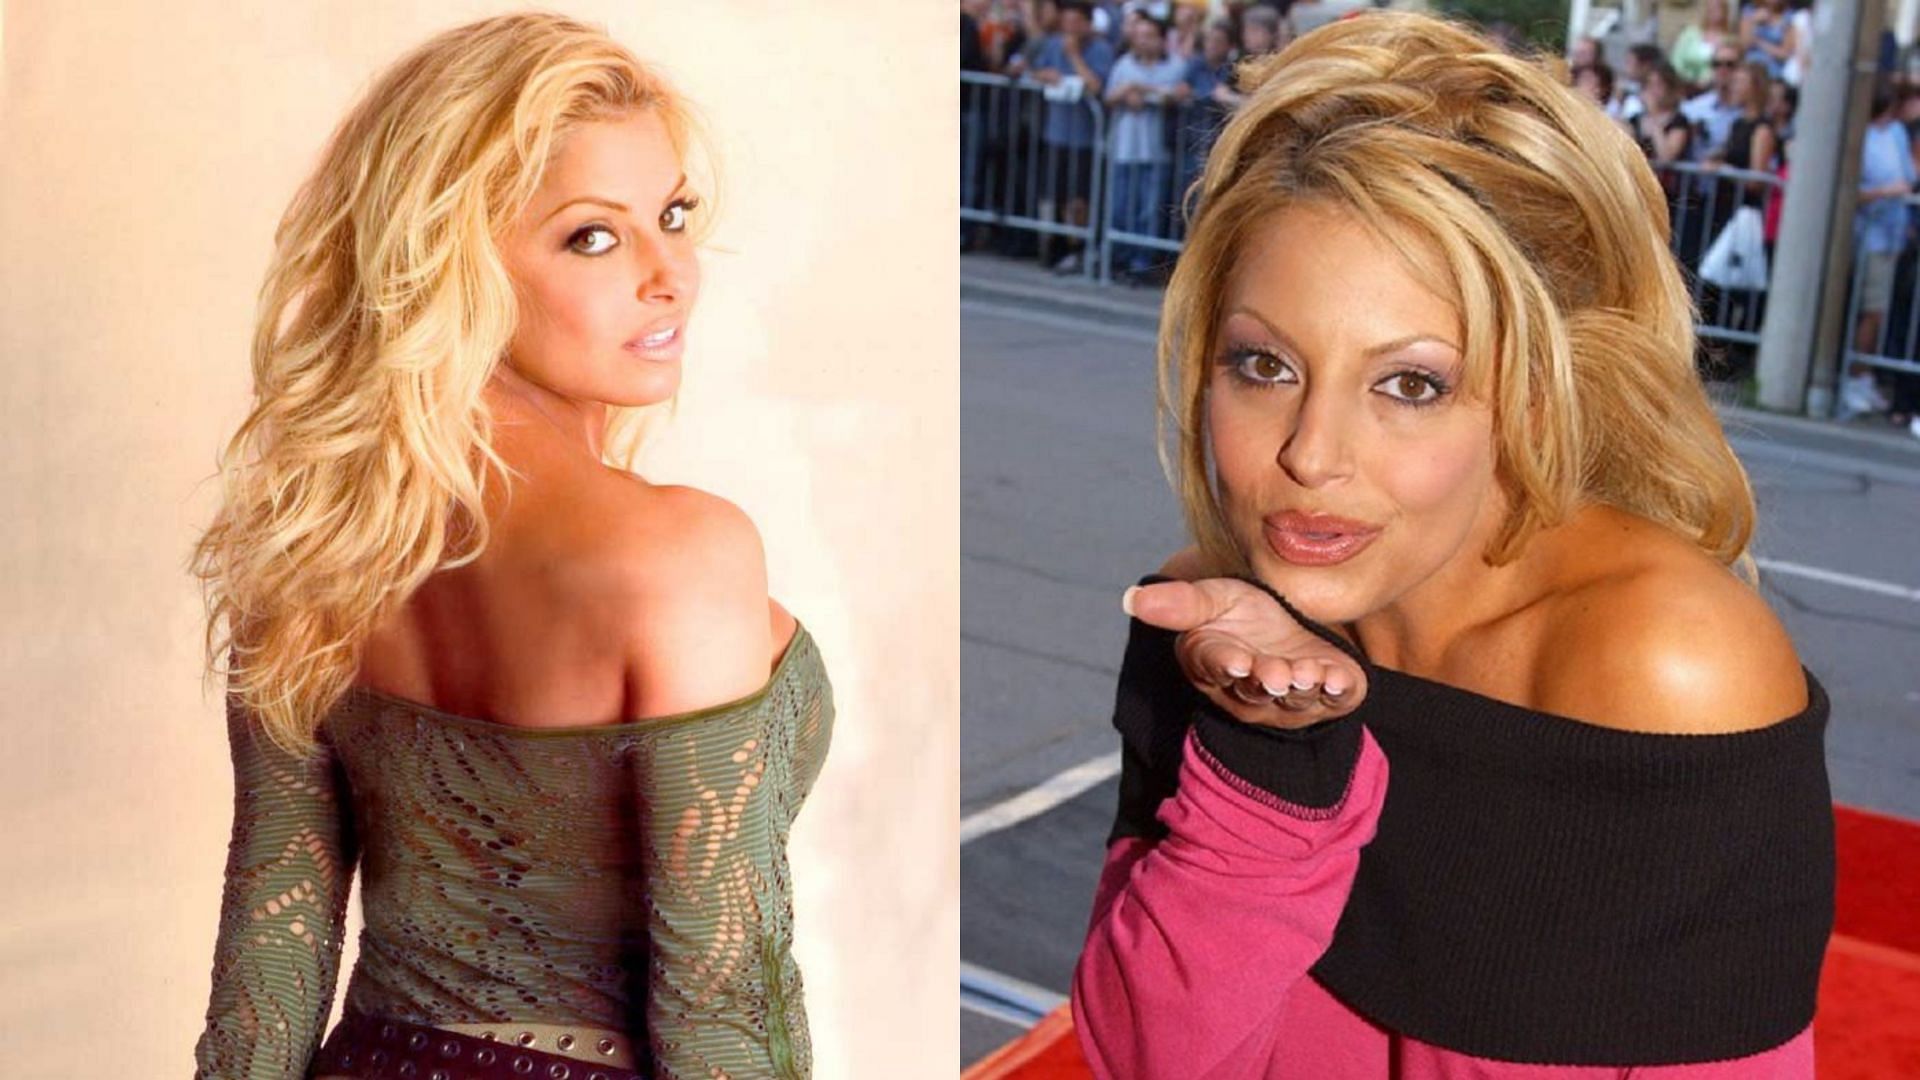 When ExWWE star claimed that Trish Stratus frequently hit on him